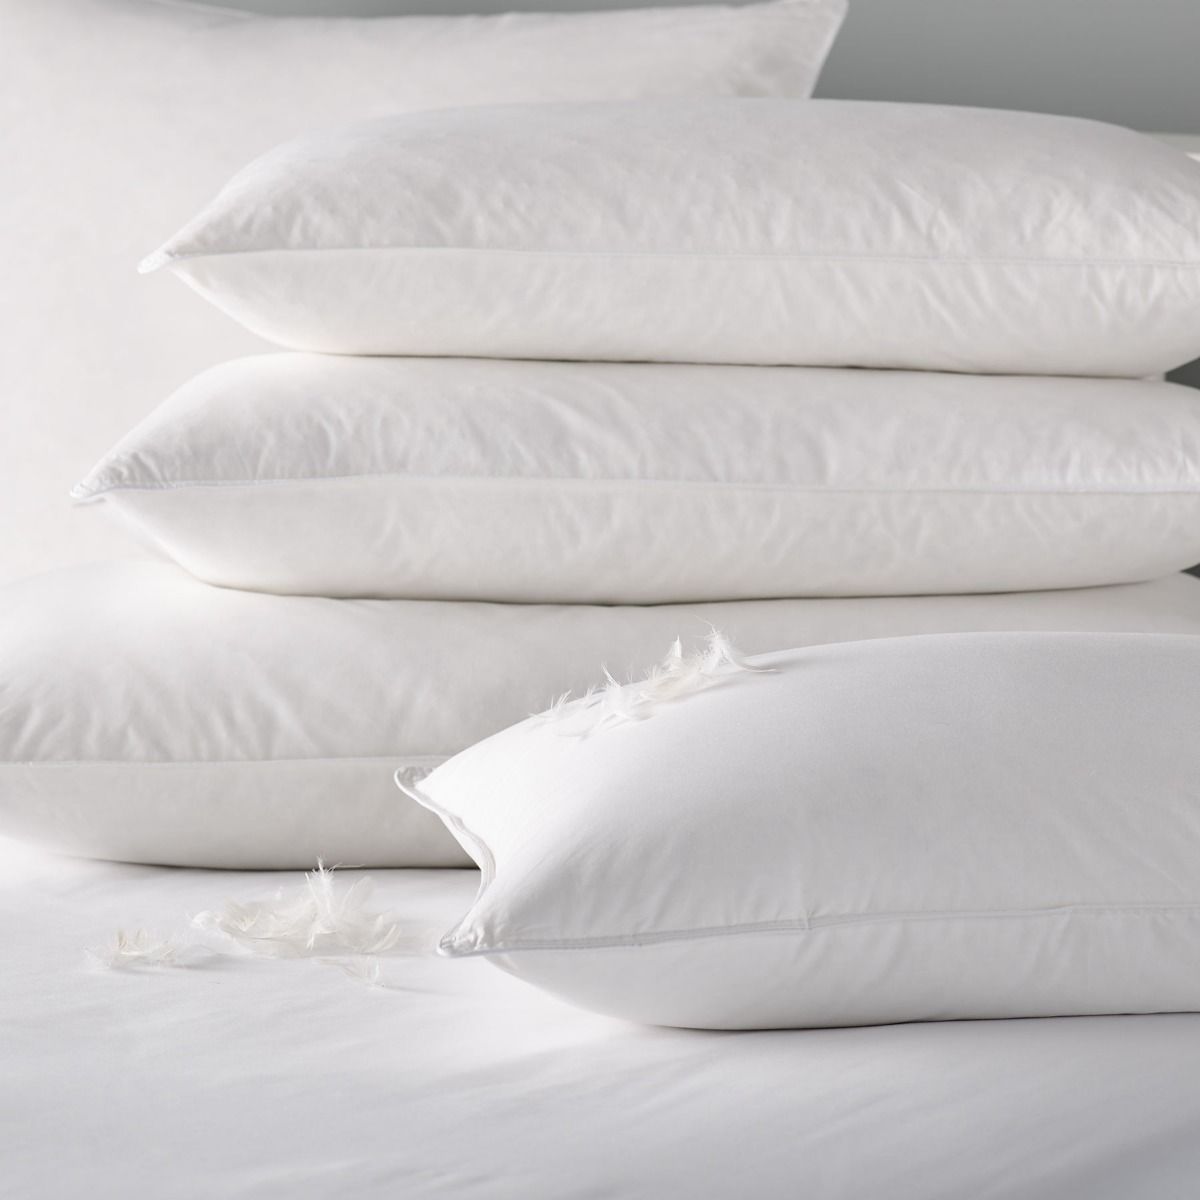 Pair of Luxury Quality 85% Duck Feather and 15% Down Pillows 100% COTTON COVER 